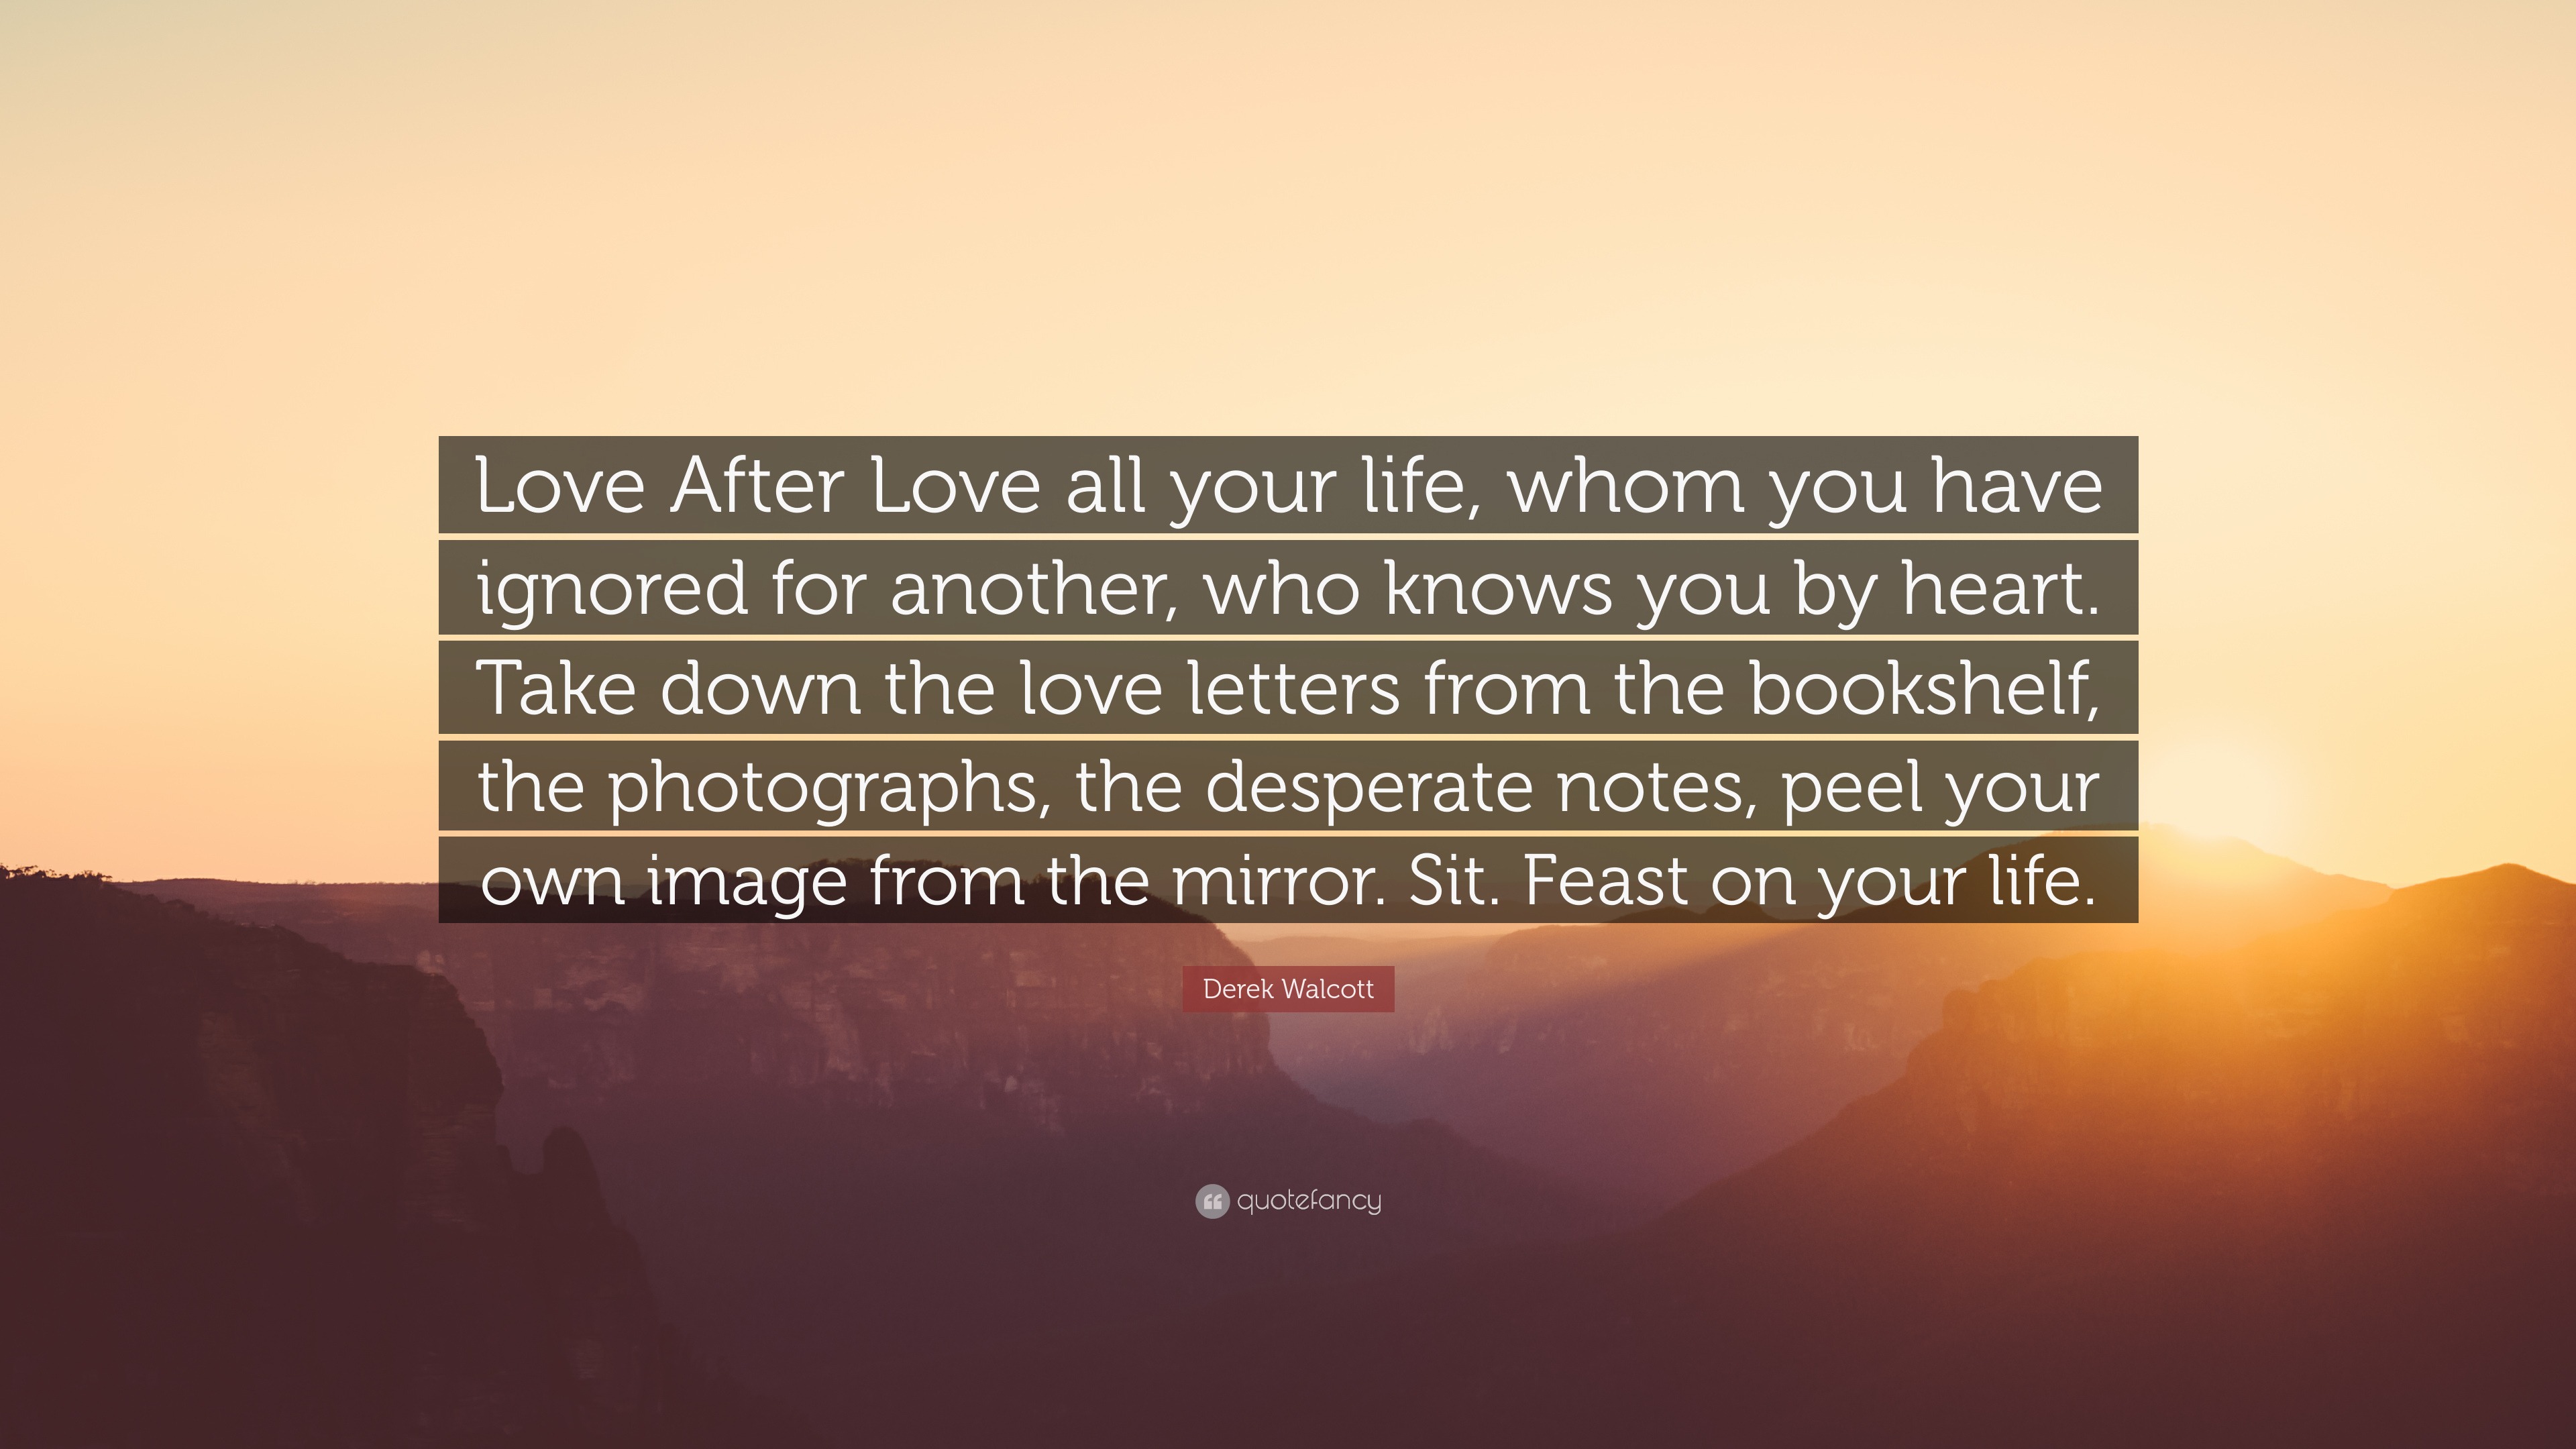 Derek Walcott Quote “Love After Love all your life whom you have ignored